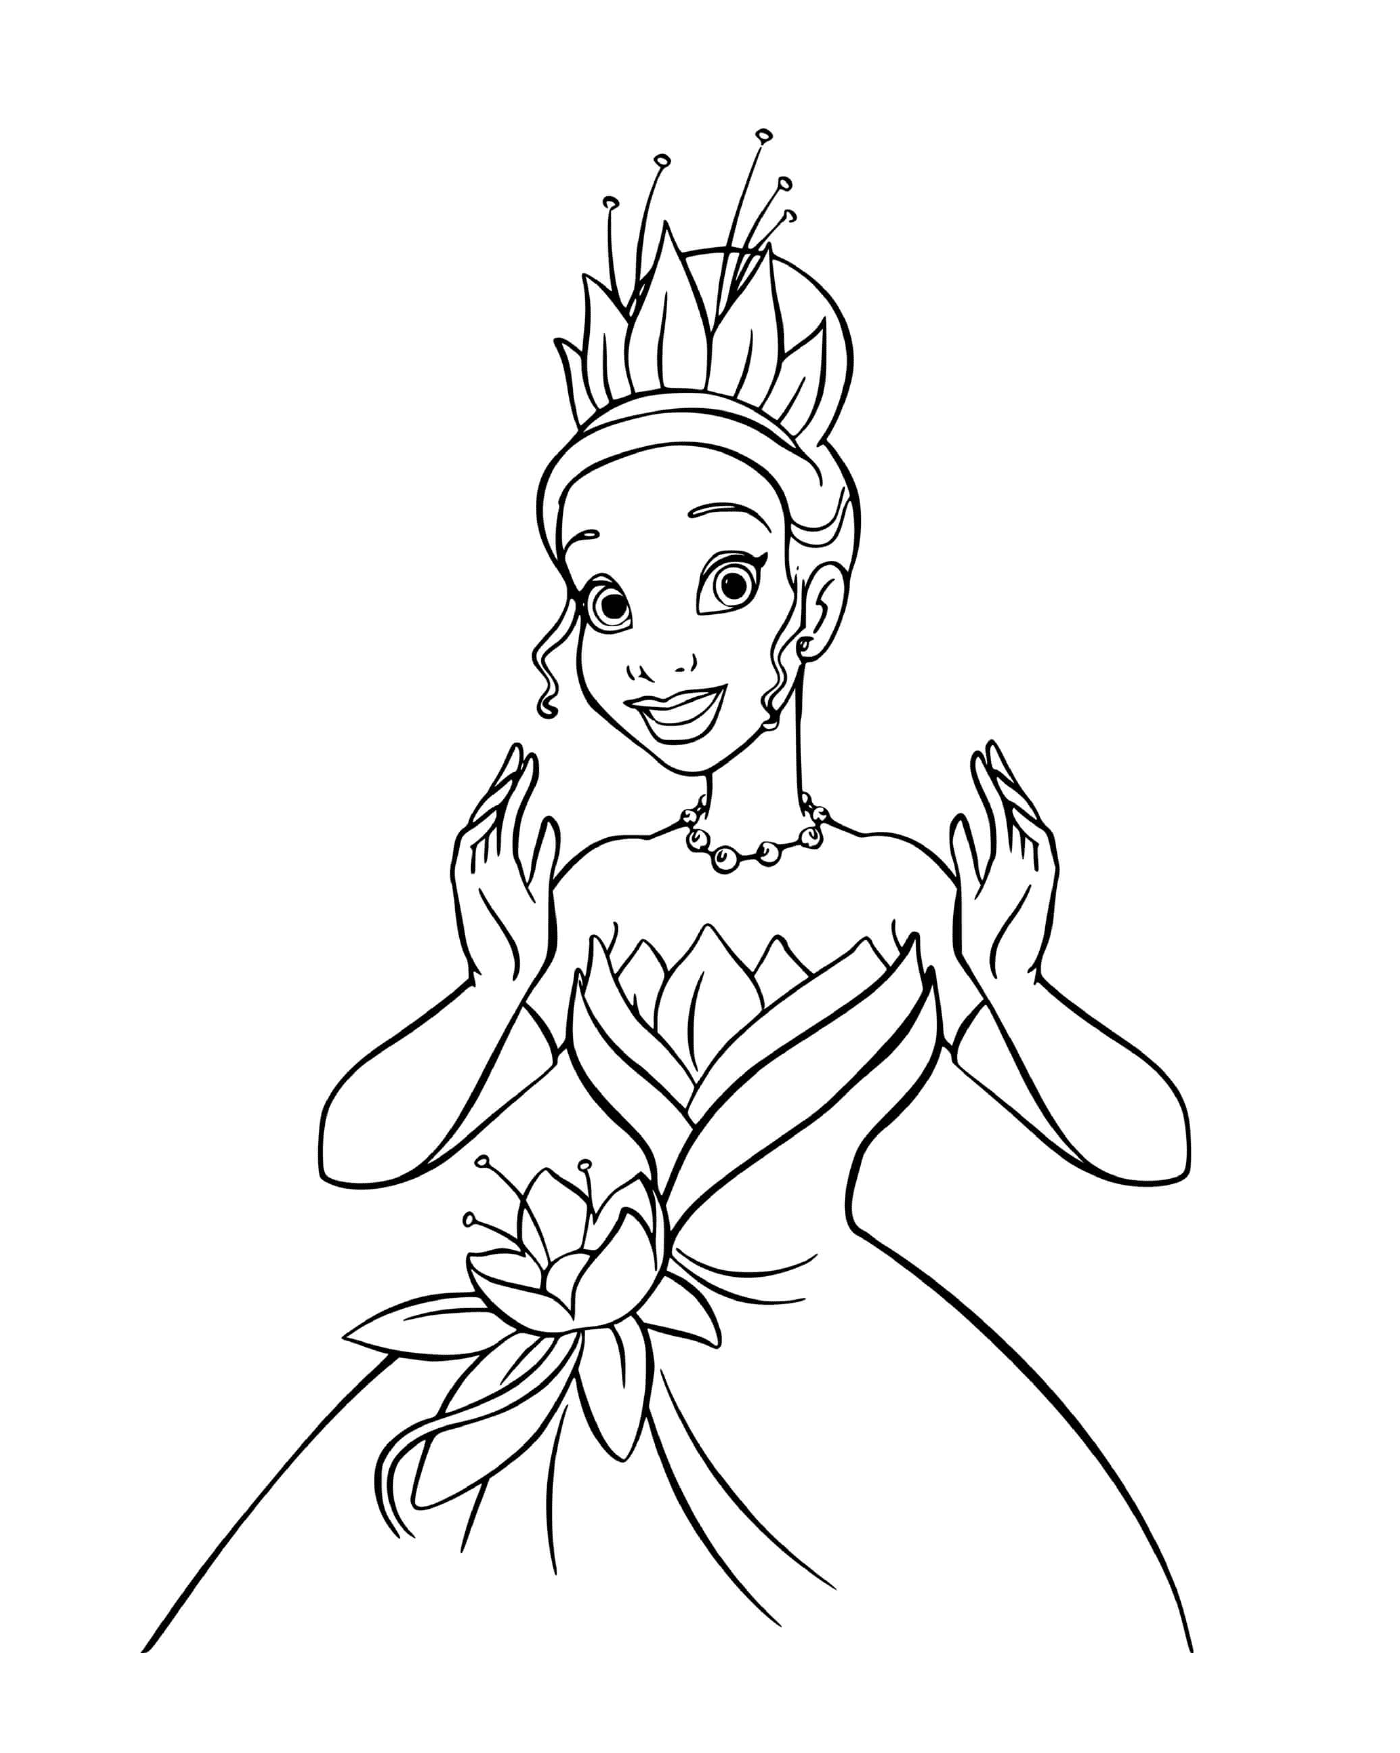  Tiana in The Princess and the Frog 